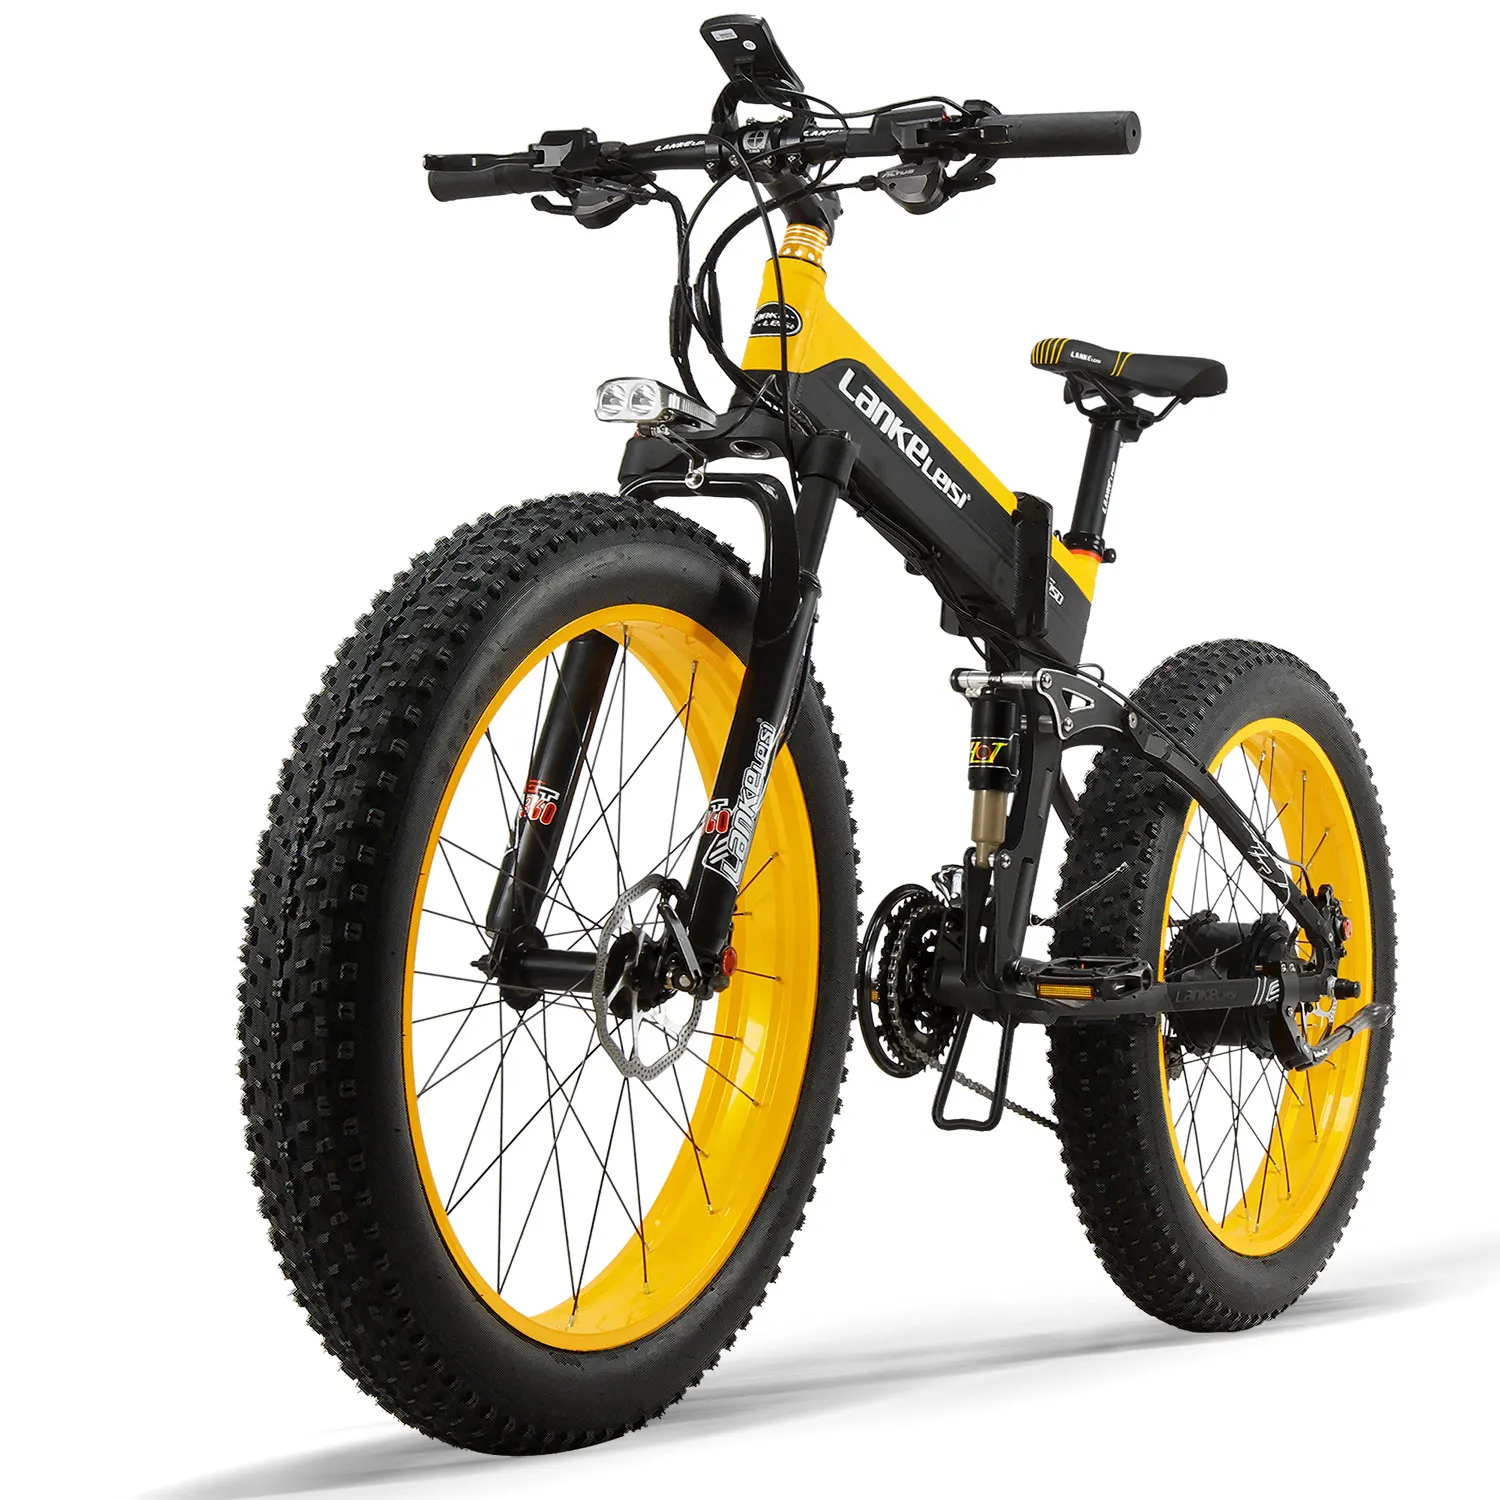 

26inch Electric Mountain Bike 1000W/500W Fat Tire Electric Bicycle with Removable 48V Lithium-ion Battery 9 Speed Shifter Ebike, Black yellow